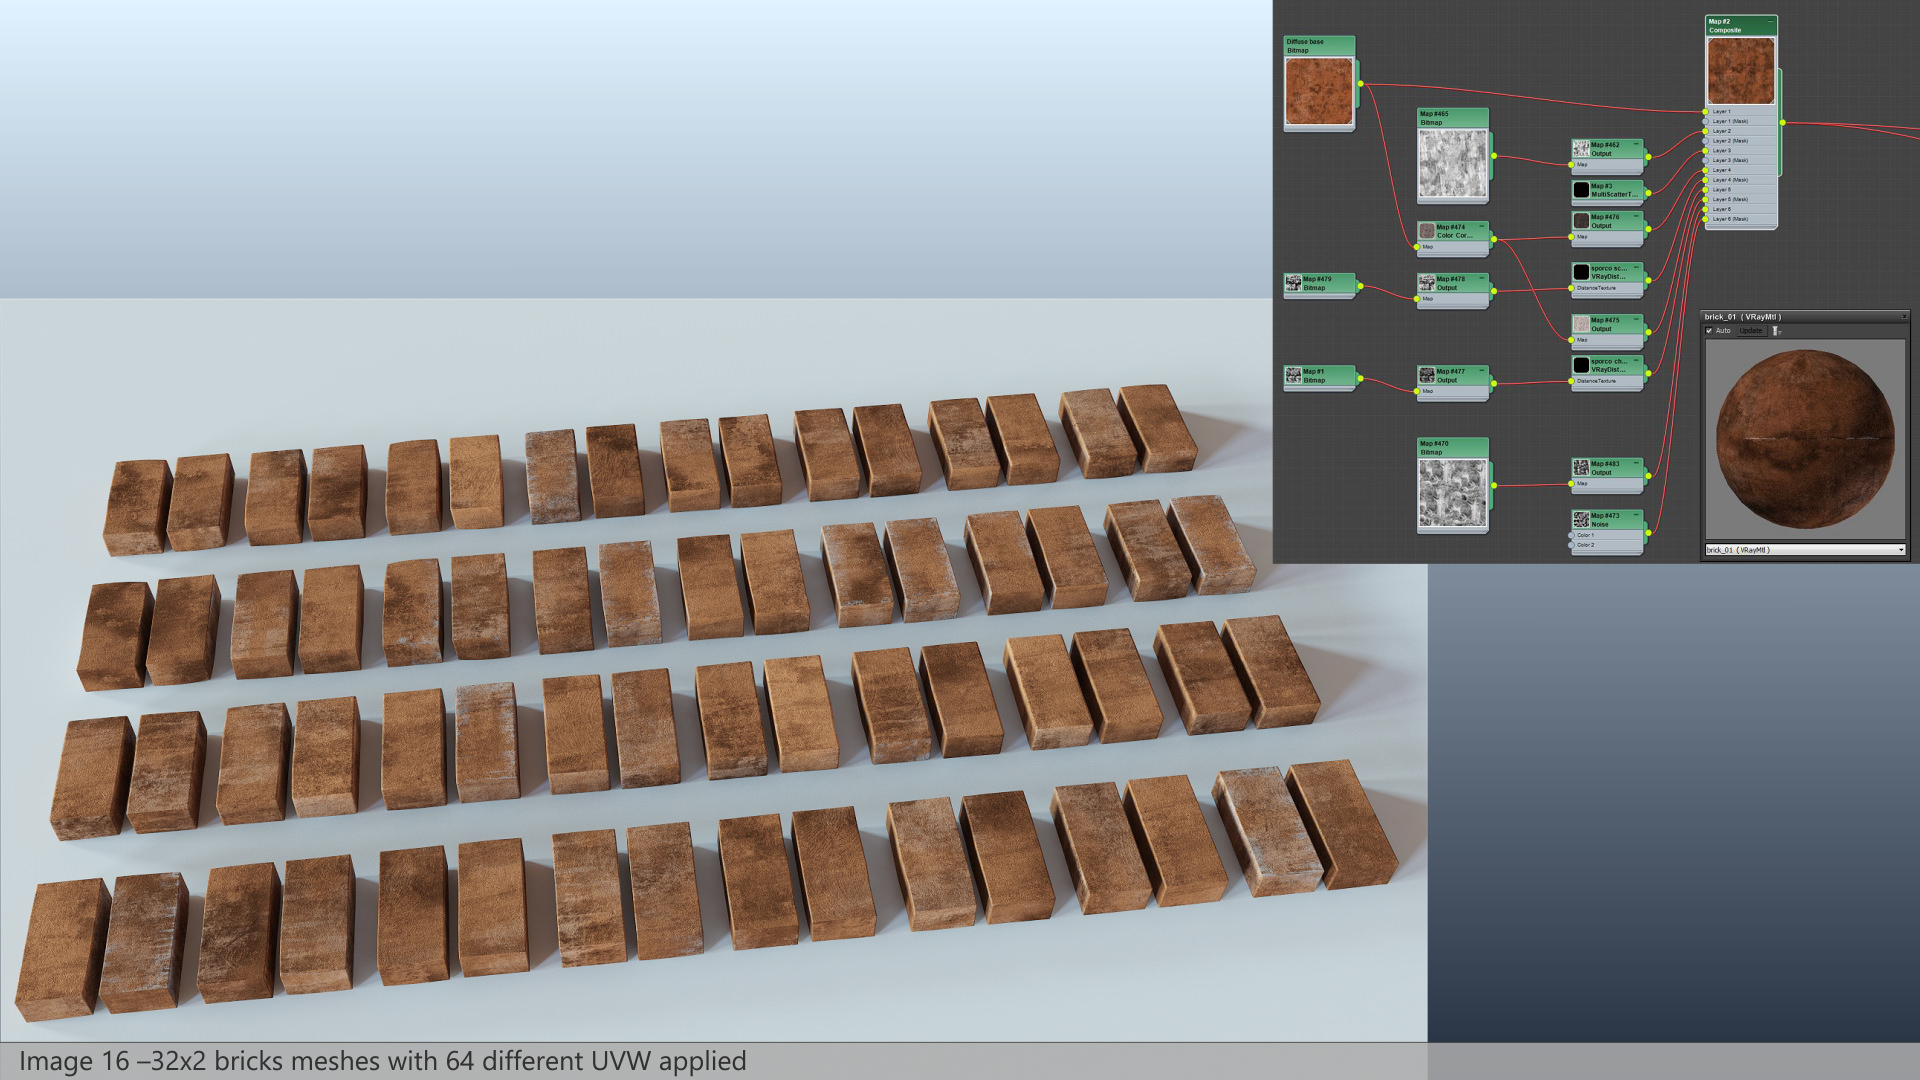 Termitary House - 32x2 bricks meshes with 64 different UVW applied